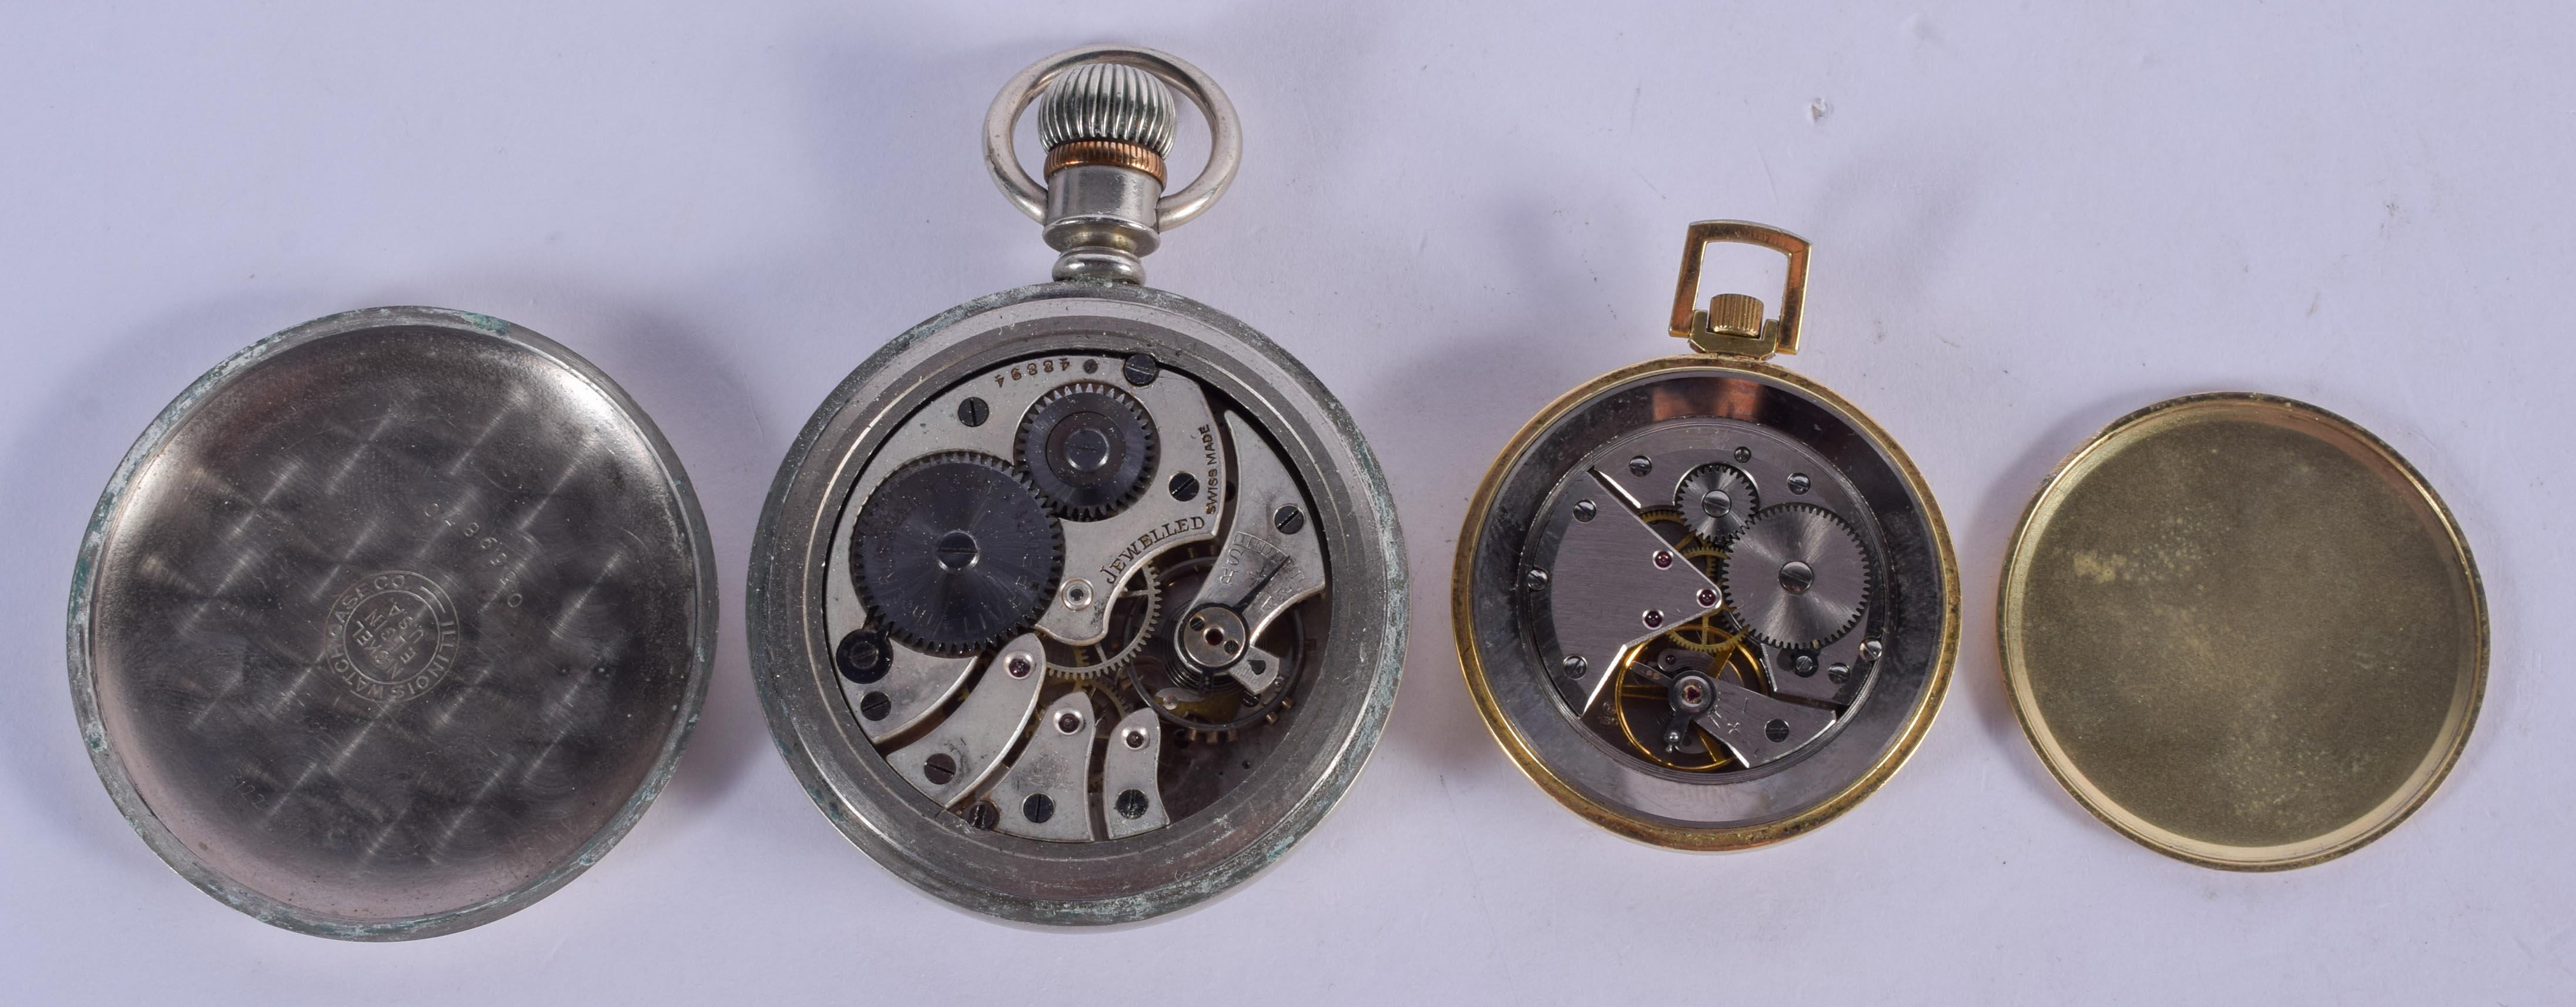 A THOMAS RUSSEL & SON POCKET WATCH and a smaller retime watch. Largest 5 cm wide. (2) - Image 3 of 3